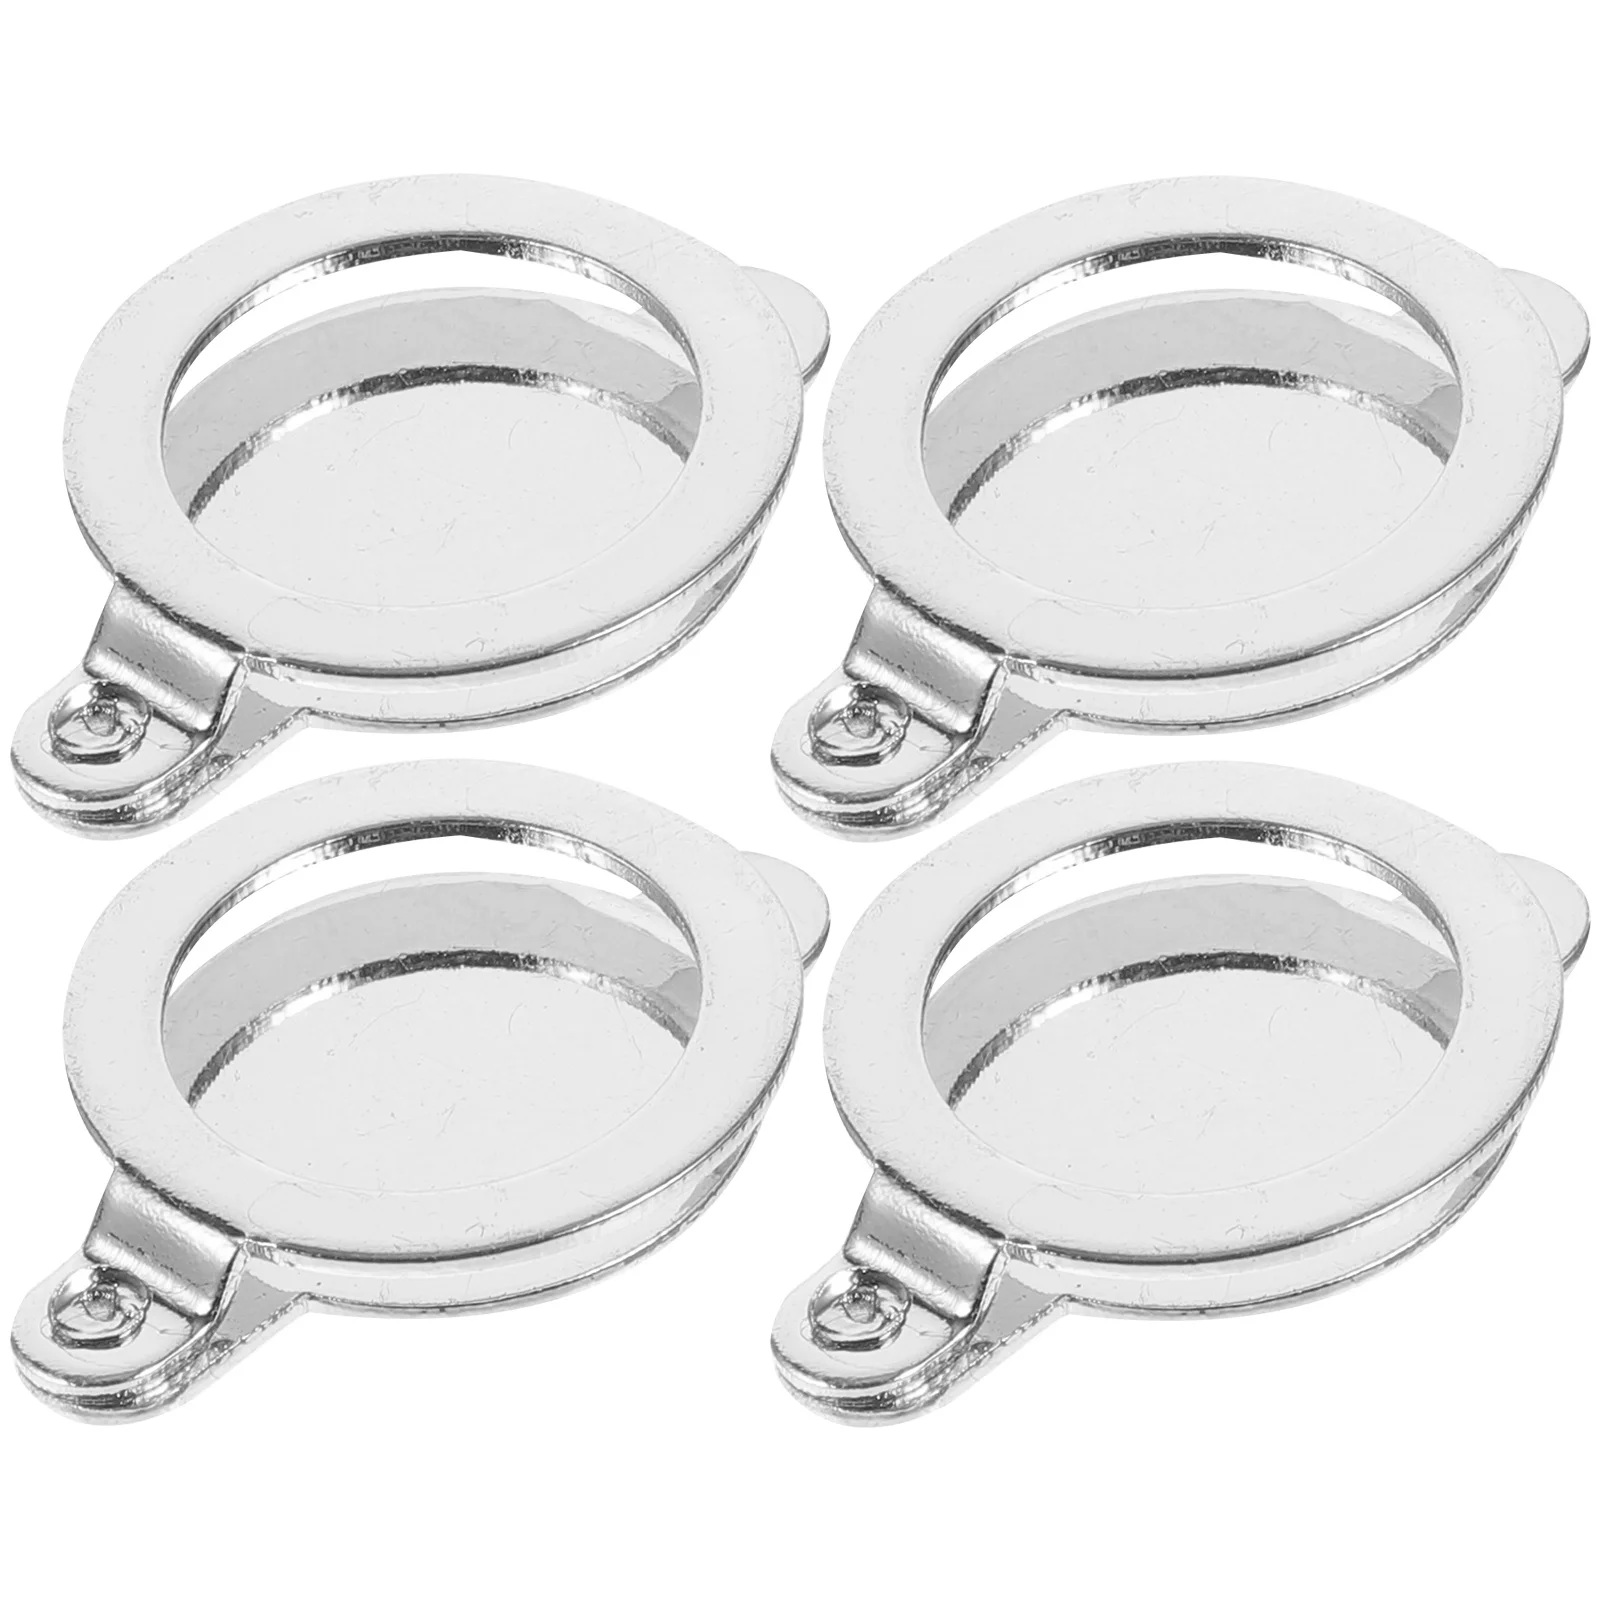 4 Pcs Door Privacy Hole Cover Peephole Only Covers Decorative Apartment Accessories Security